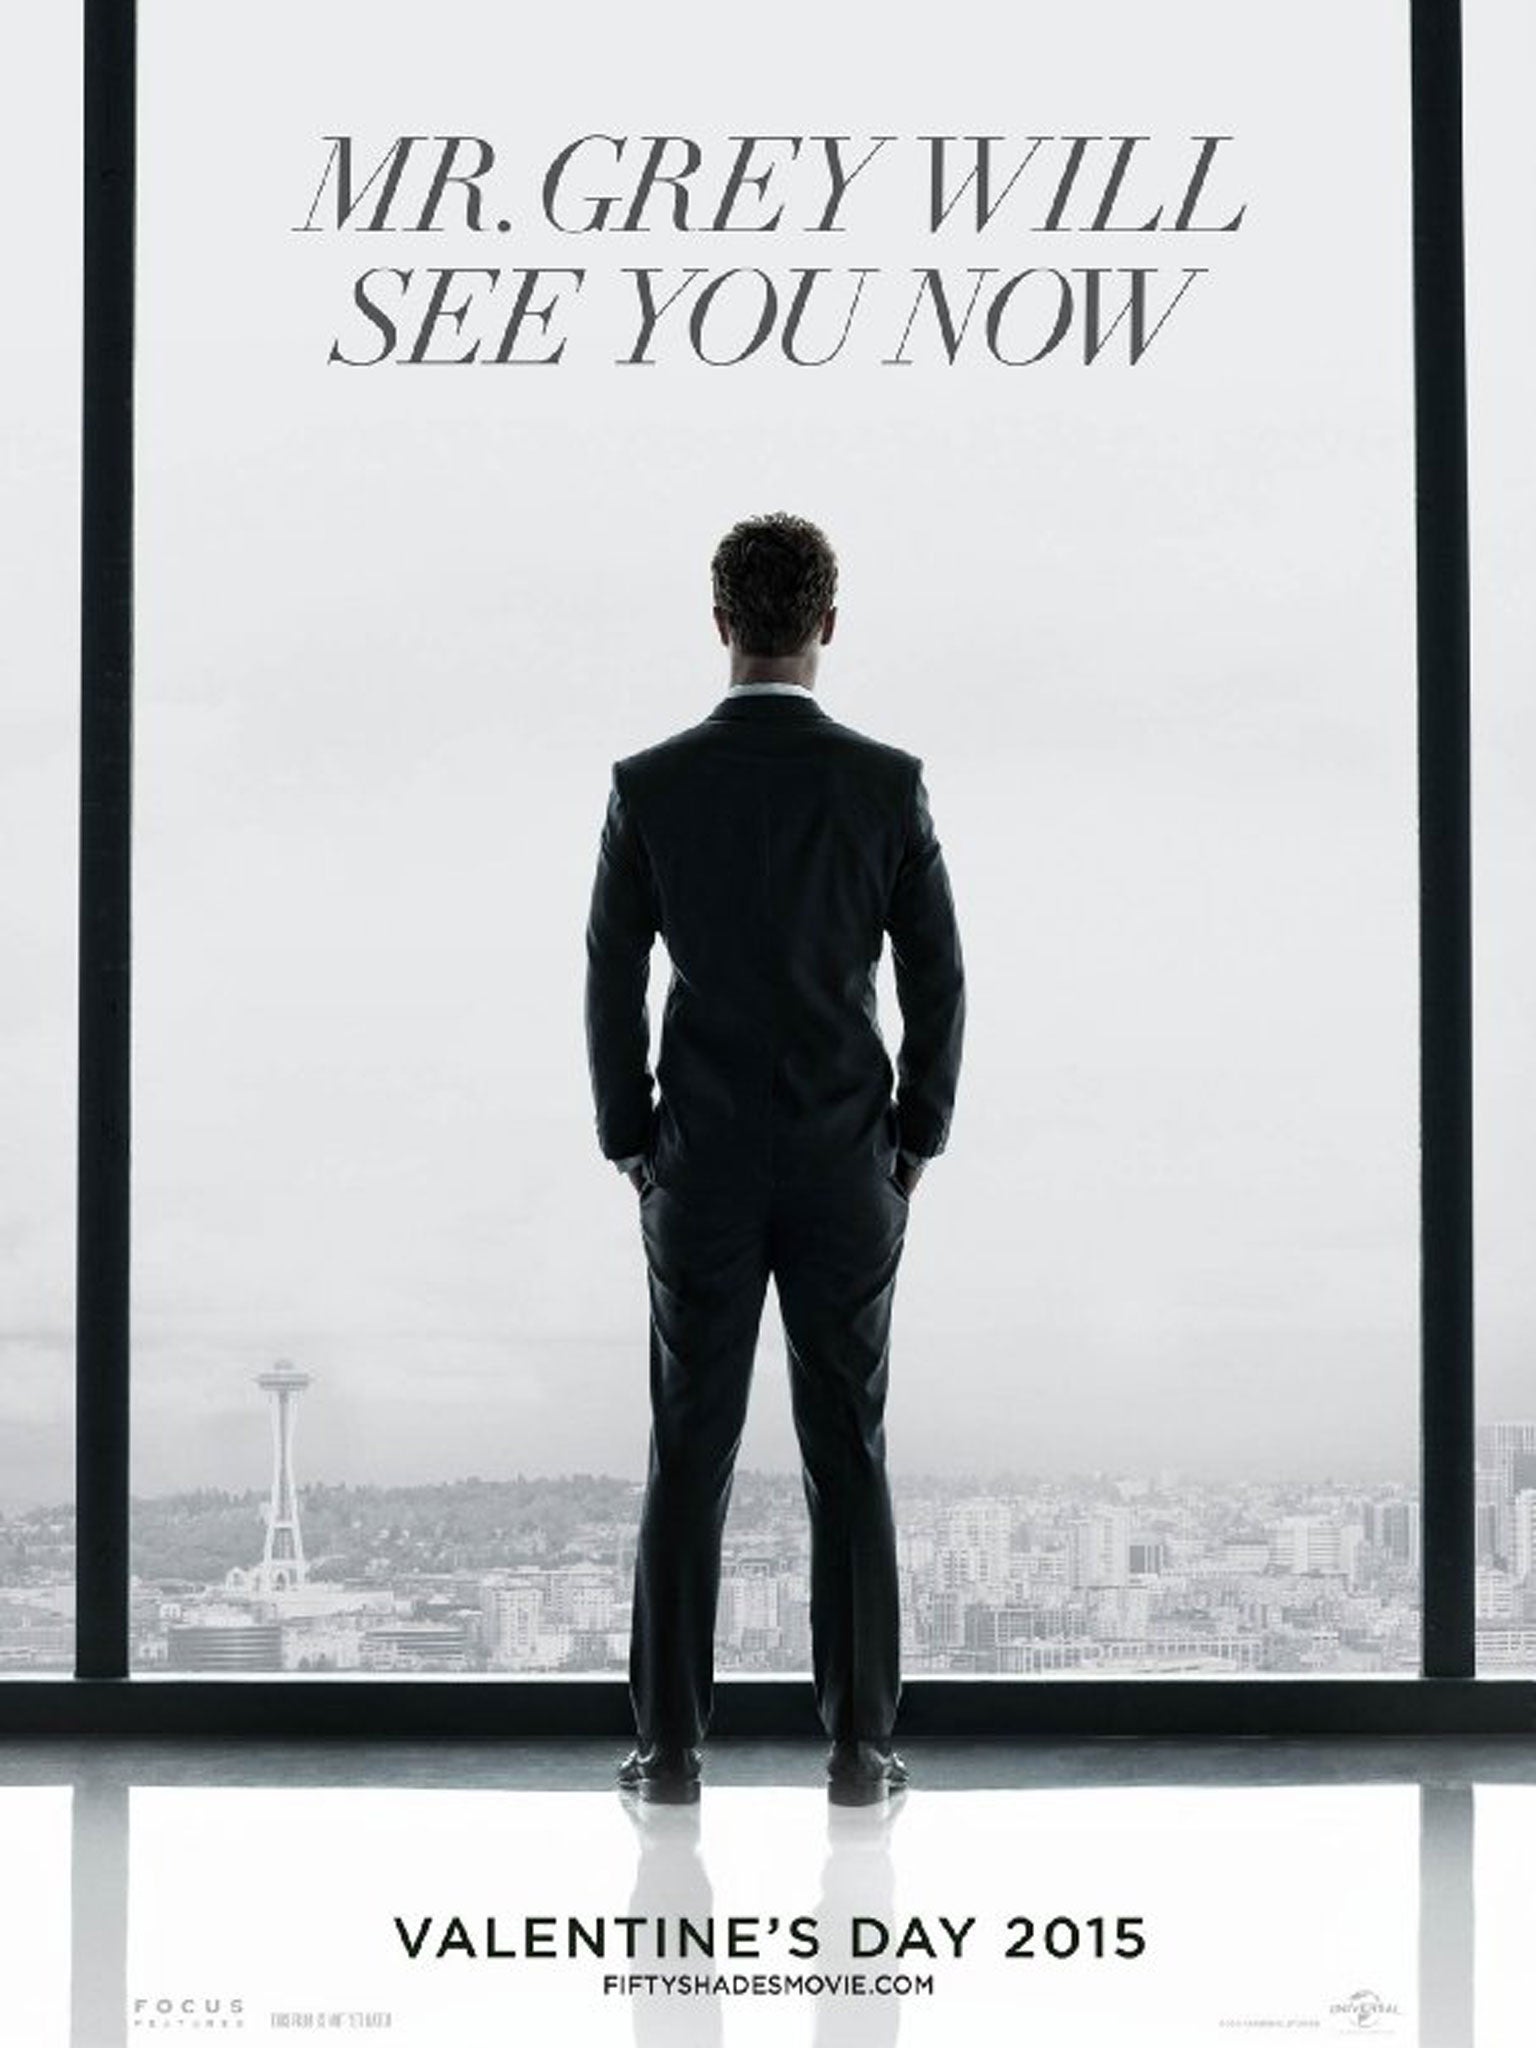 Jamie Dornan as Christian Grey in the Fifty Shades of Grey poster